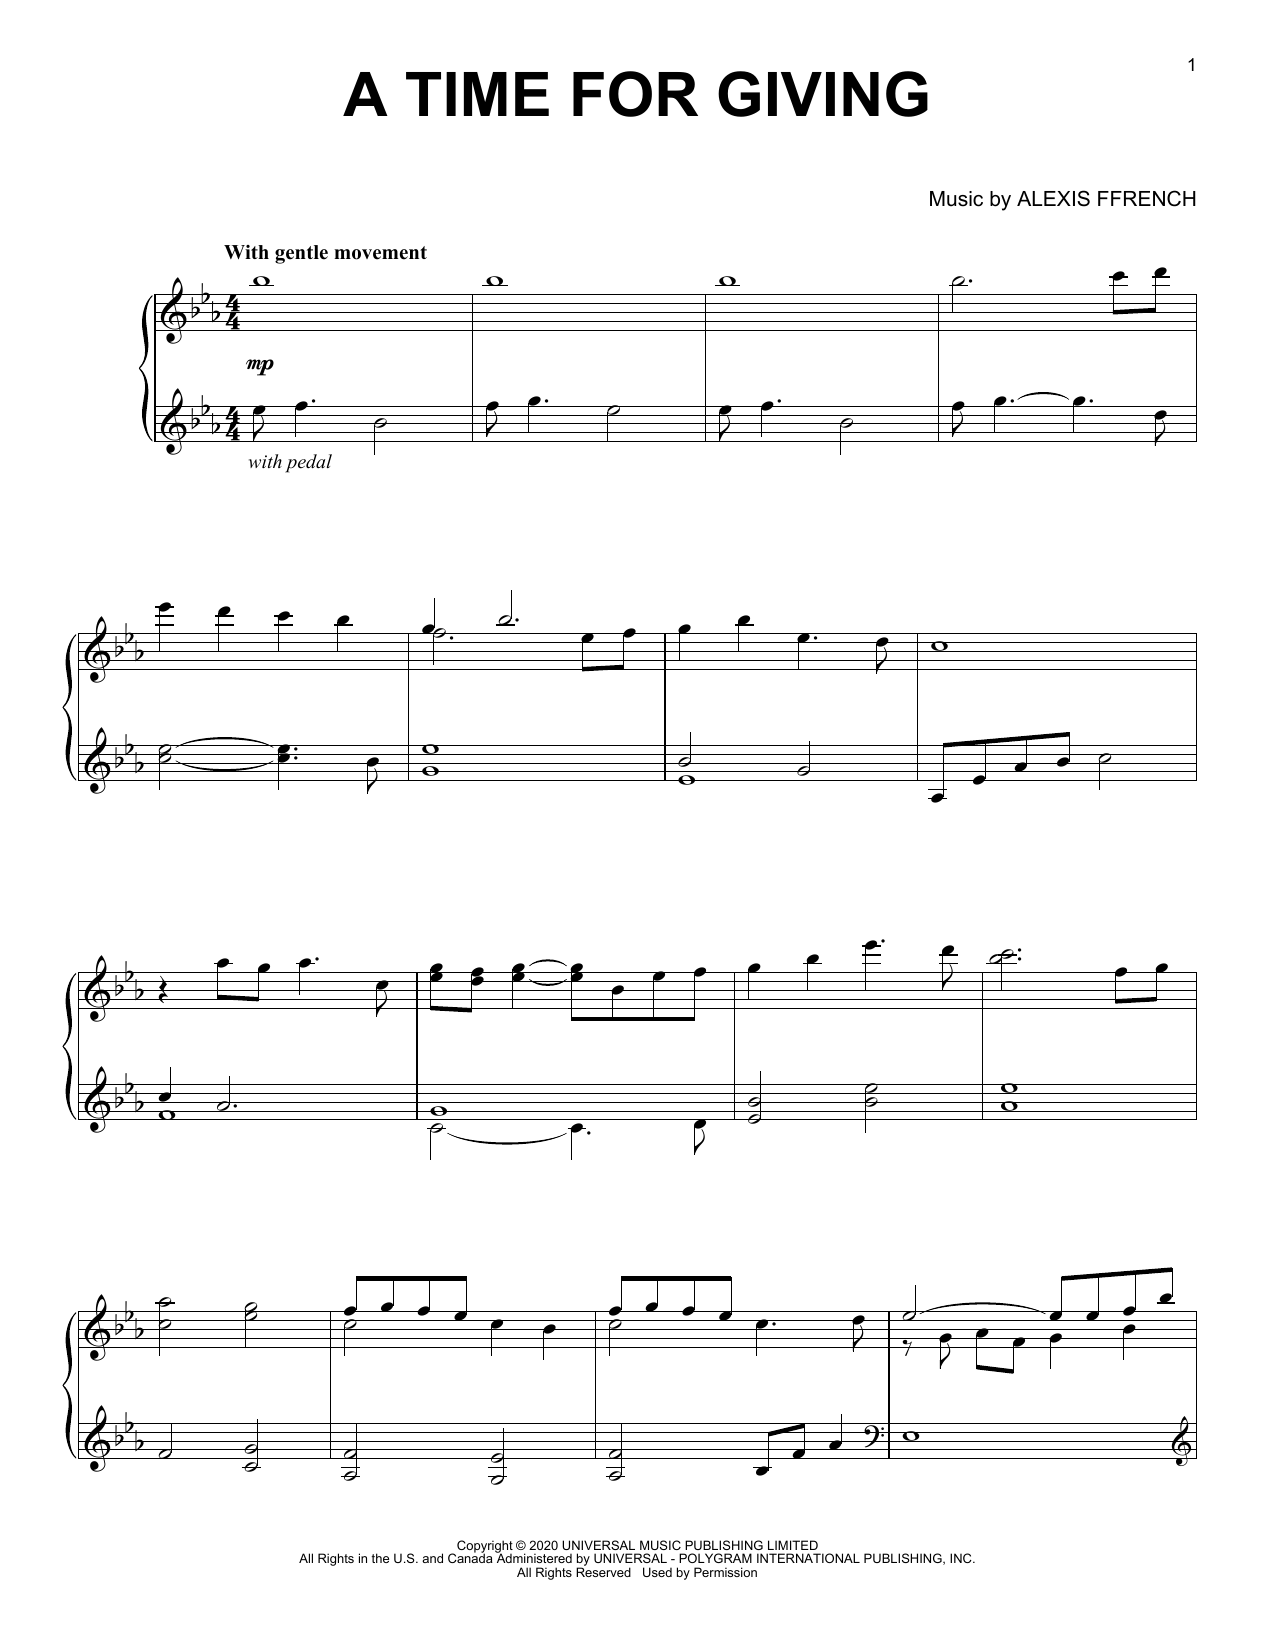 Download Alexis Ffrench A Time For Giving Sheet Music